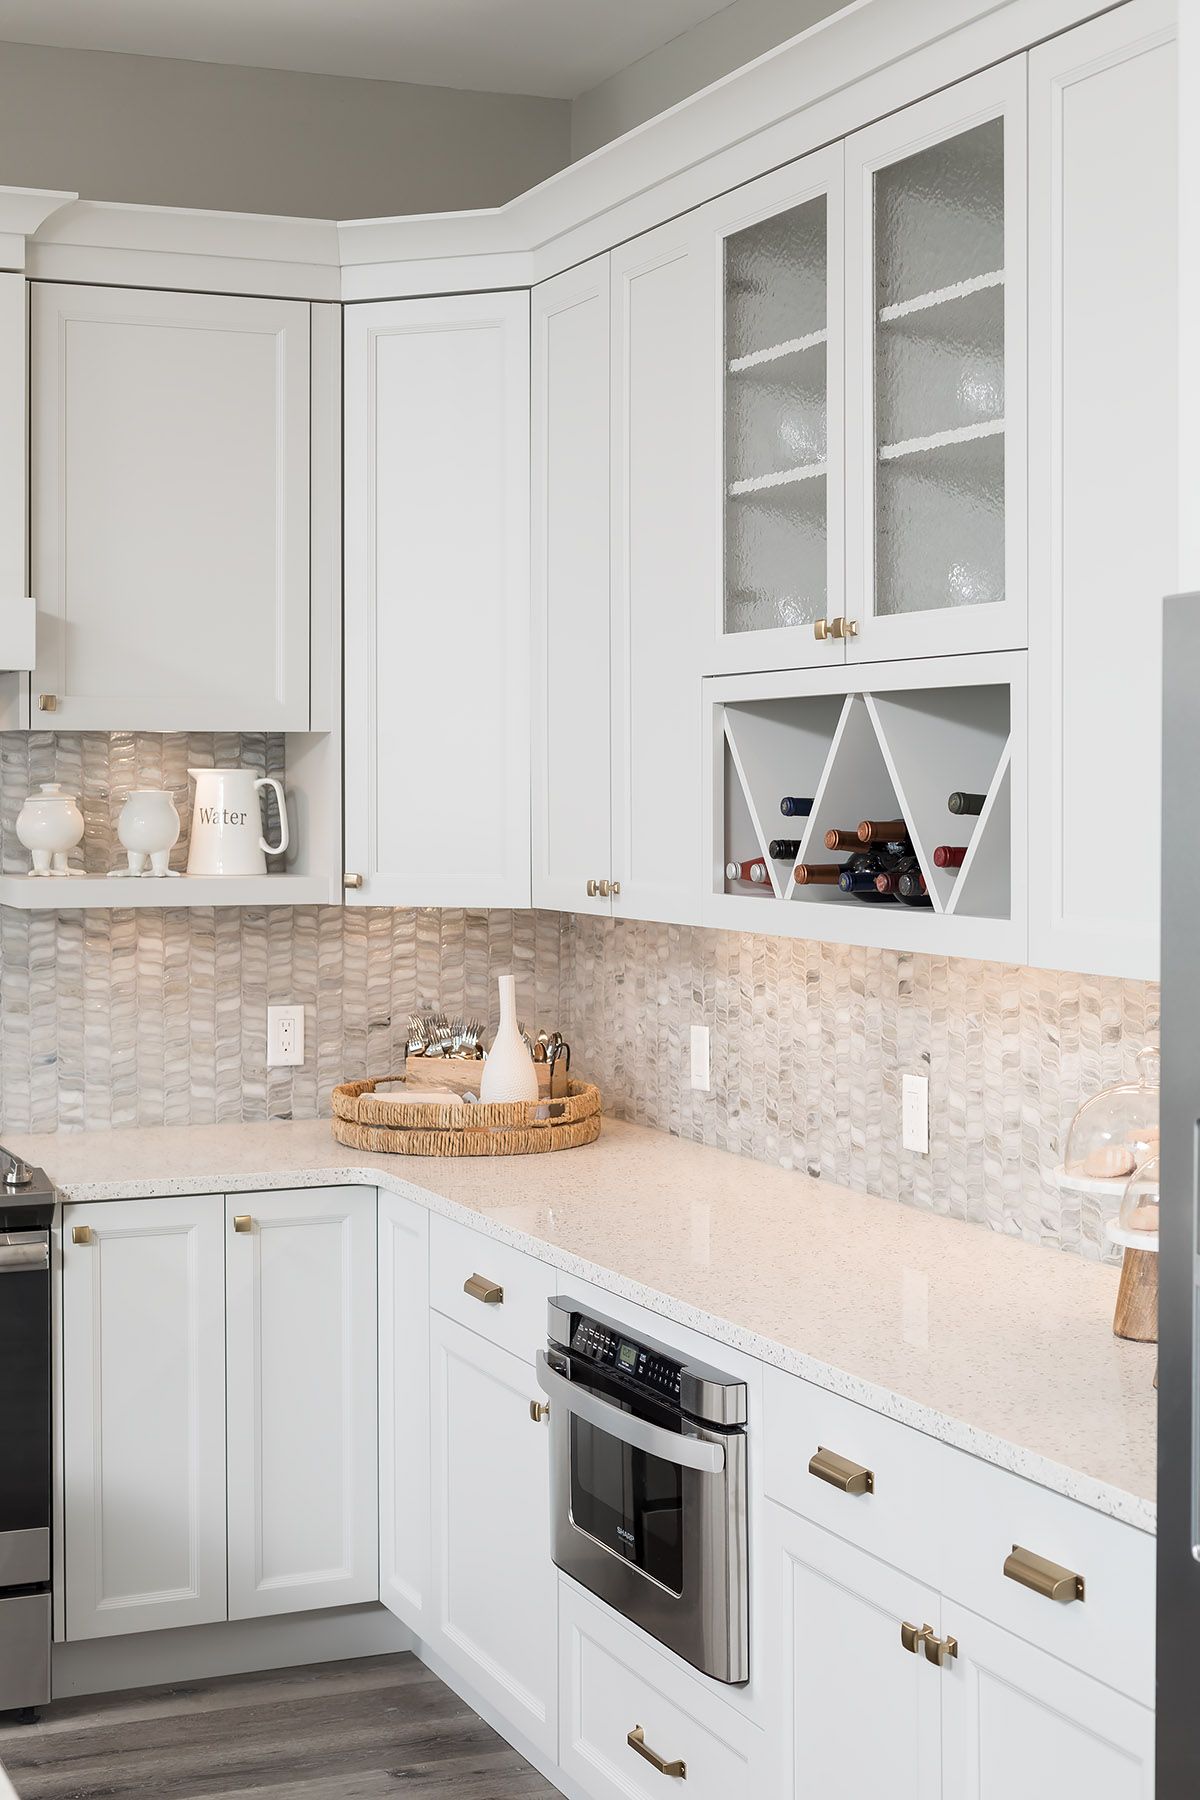 Kitchen corner cabinets: 10 stylish tips to maximize space